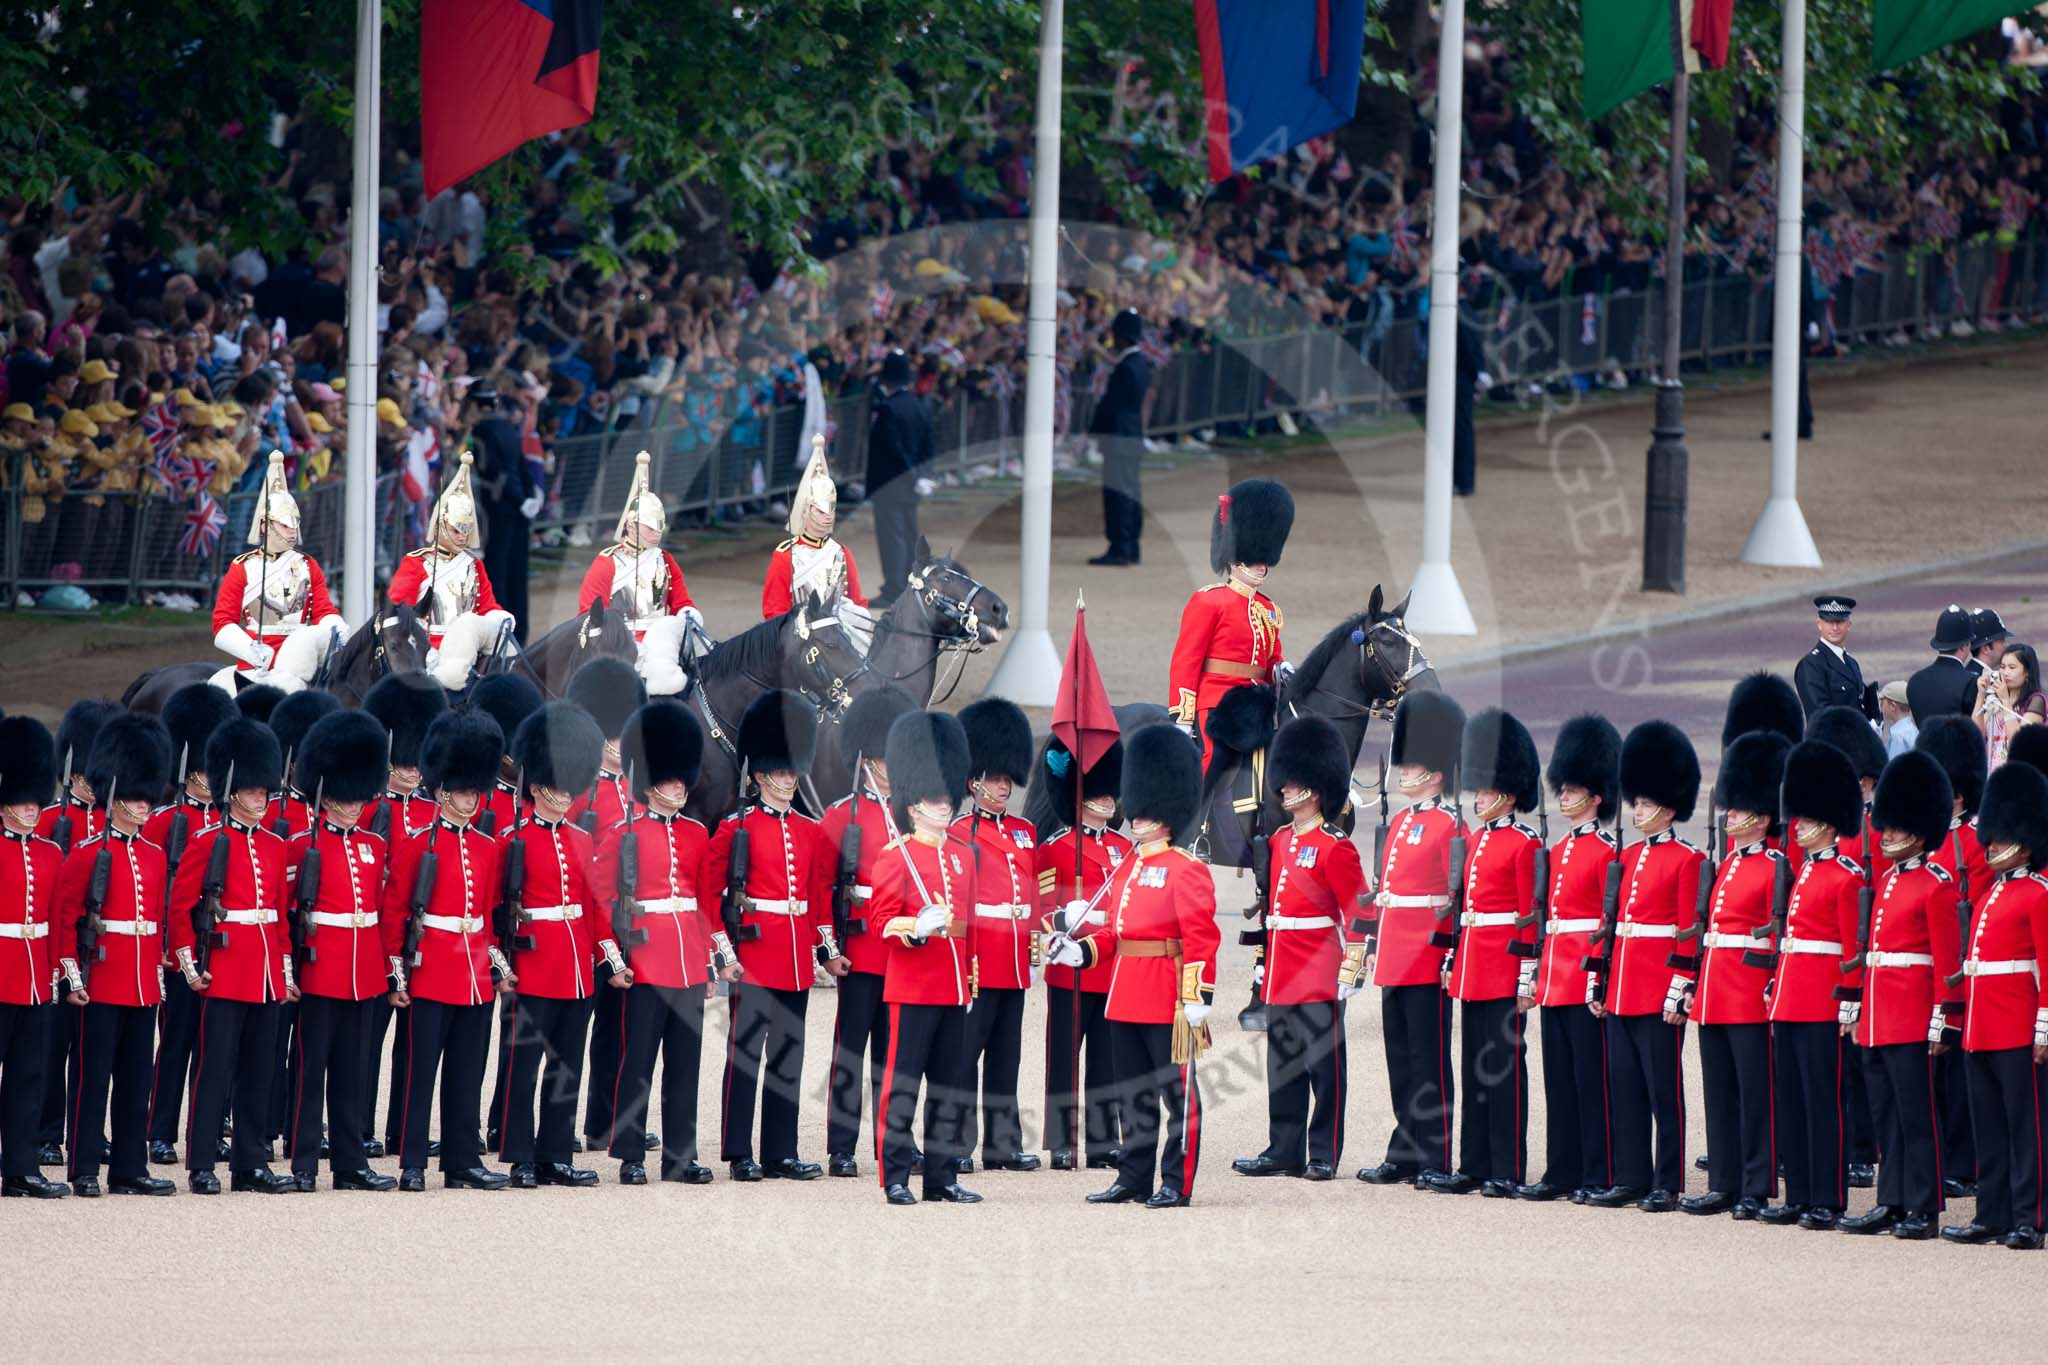 Trooping the Colour 2009: Leading the Royal Procession, the Brigade Major Household Division, Lieutenant Colonel Jeremy Bagshaw, followed by four Troopers of The Life Guards, arrives on Horse Guards Parade..
Horse Guards Parade, Westminster,
London SW1,

United Kingdom,
on 13 June 2009 at 10:54, image #103